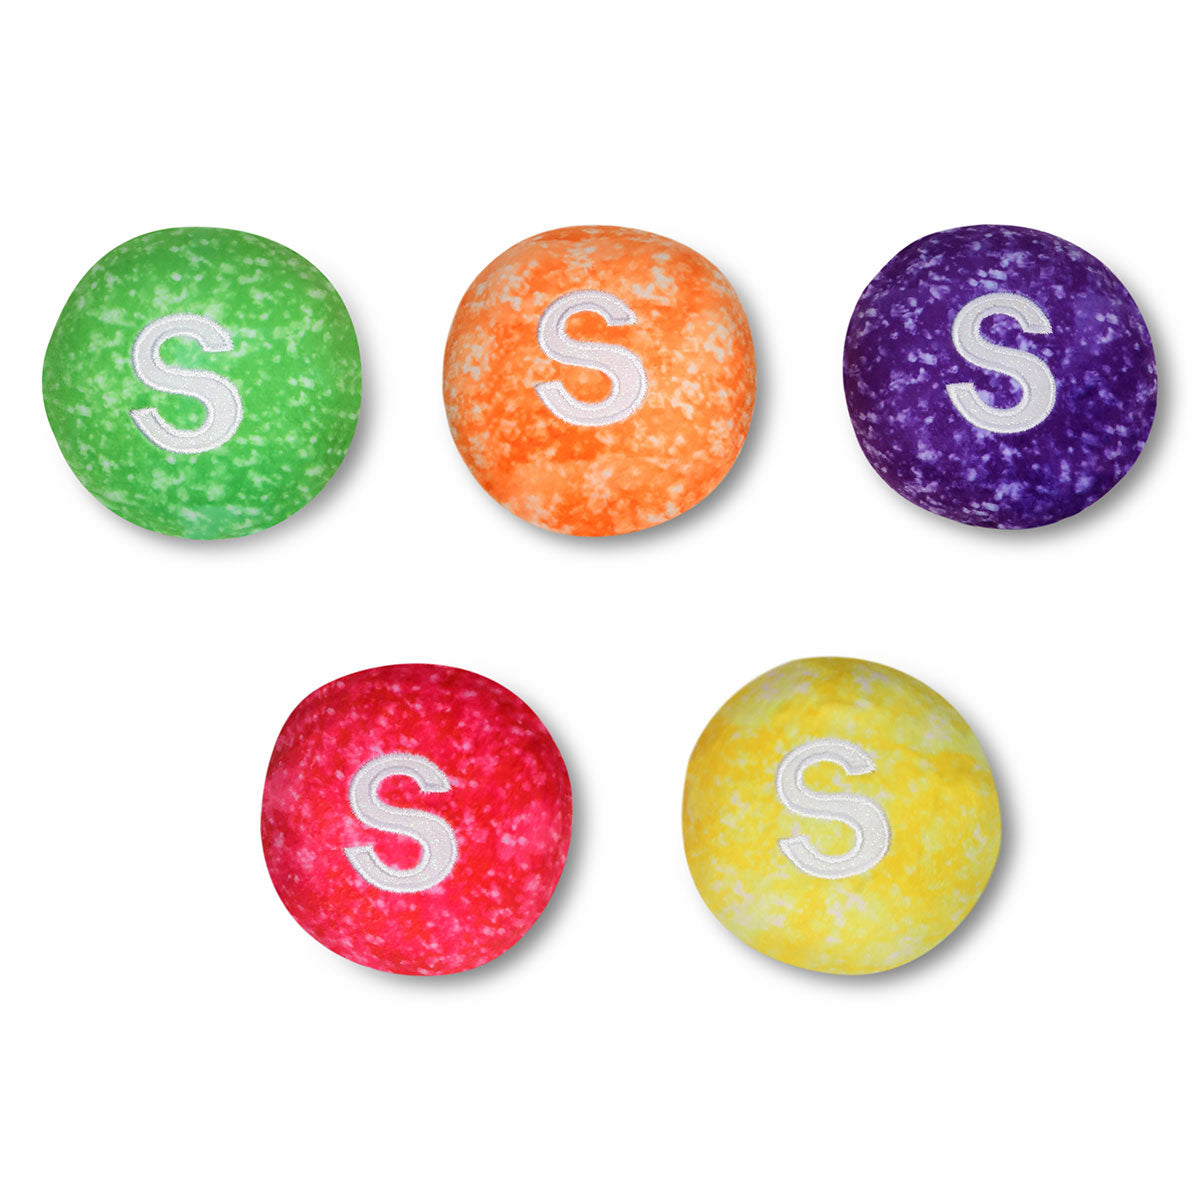 iScream Sour Skittles Candy Package Fleece Plush